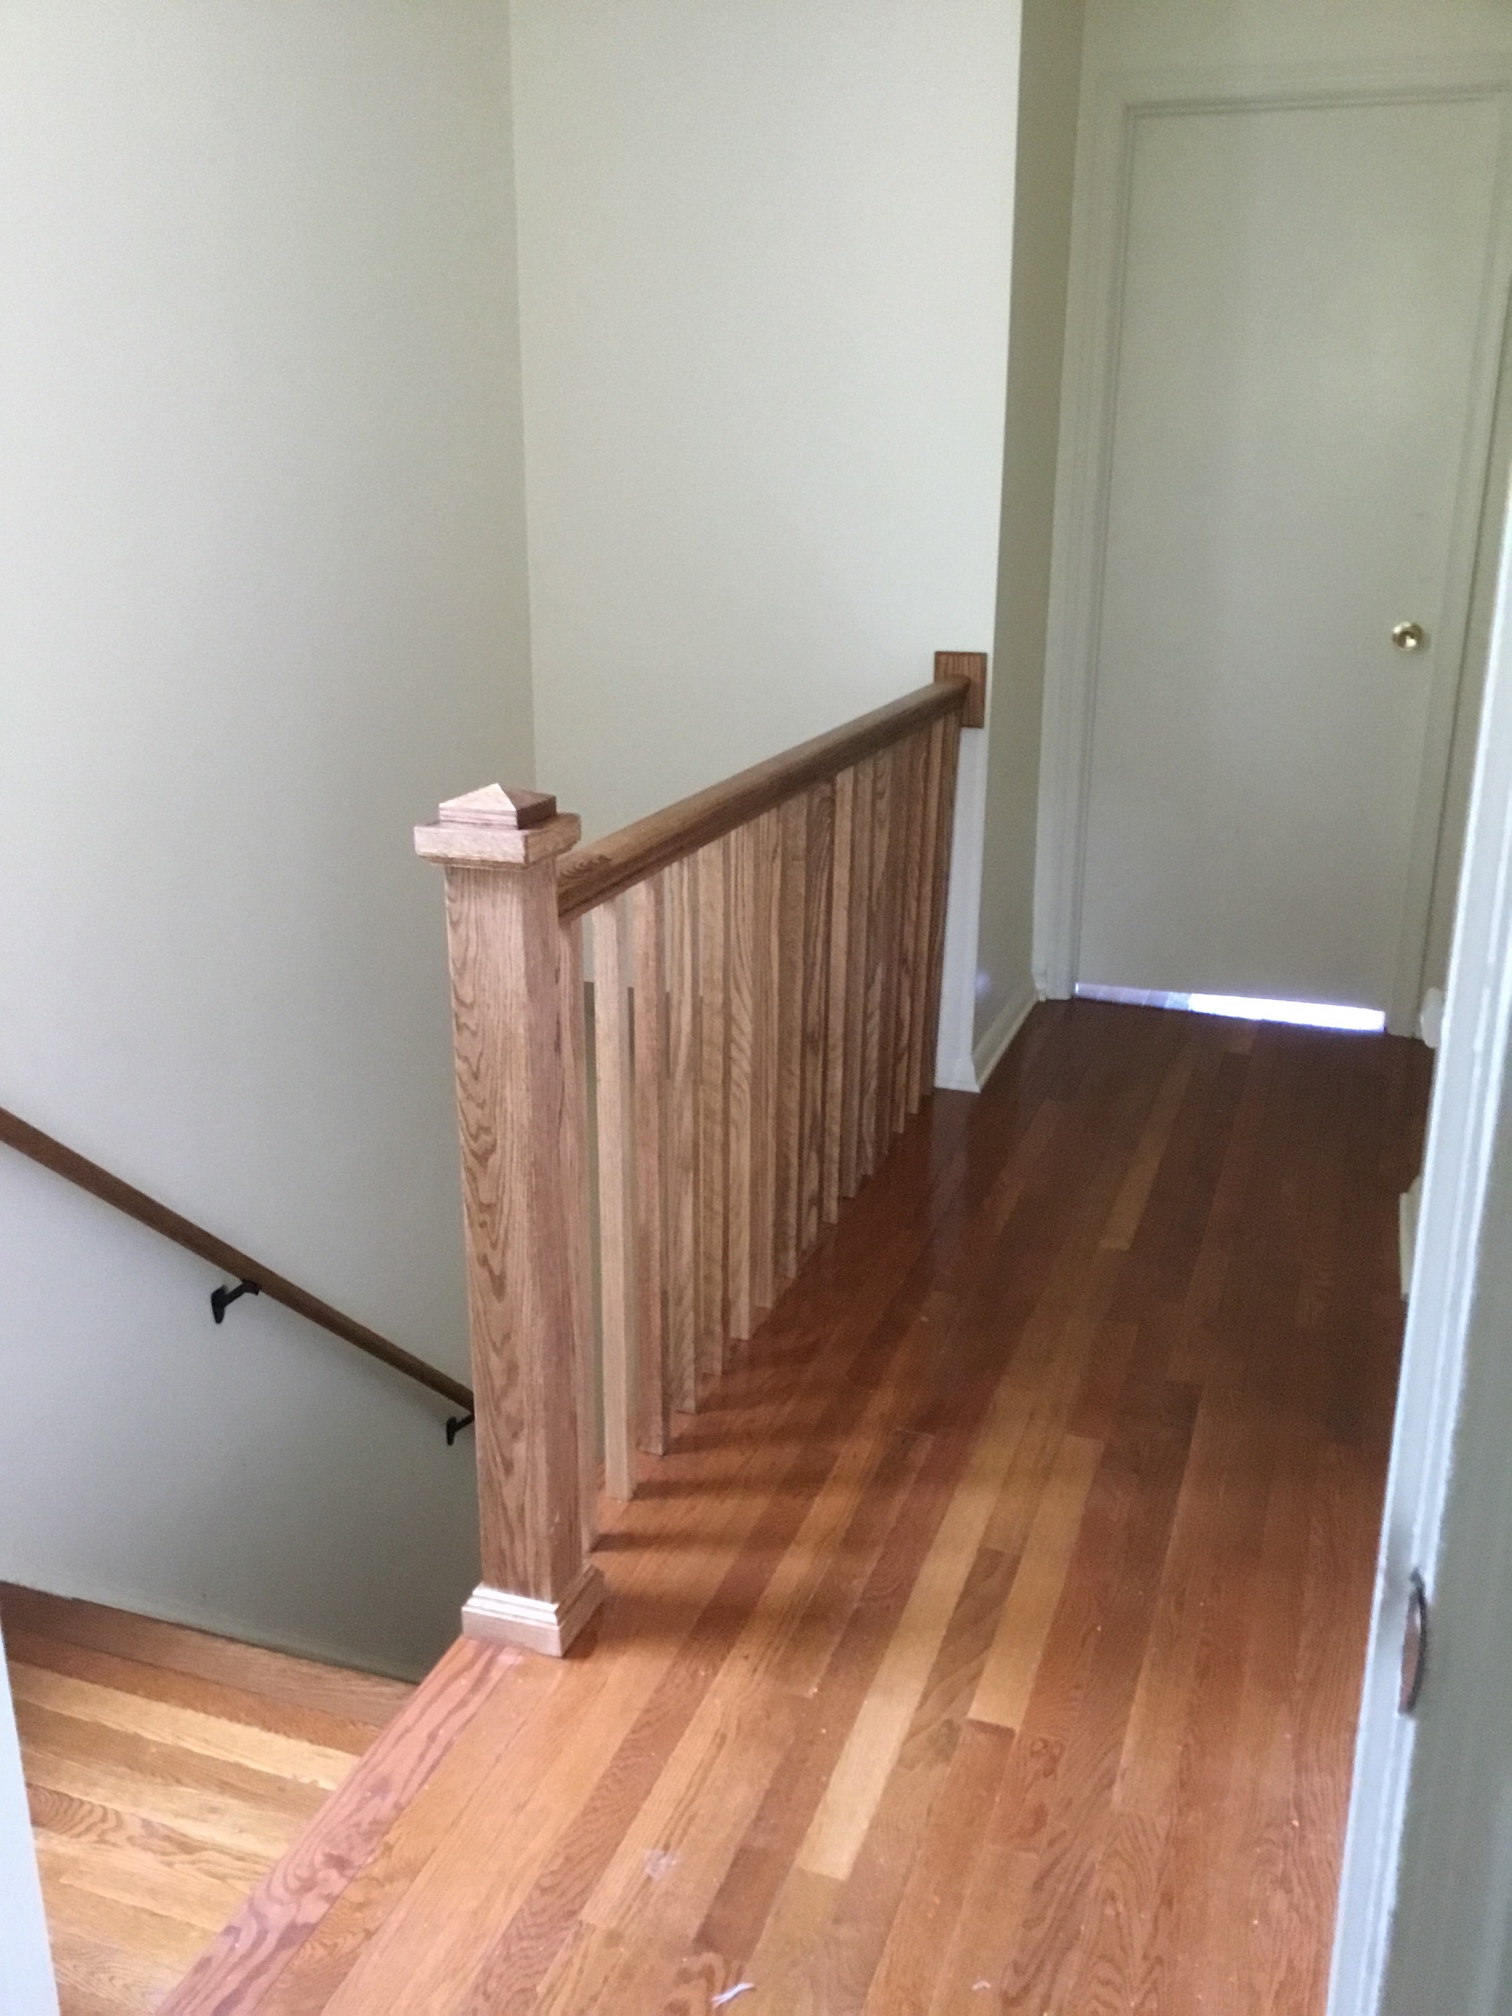 Bannister wood railing with pickets installation in Bethesda, MD. It is stained to match existing wooden floor.